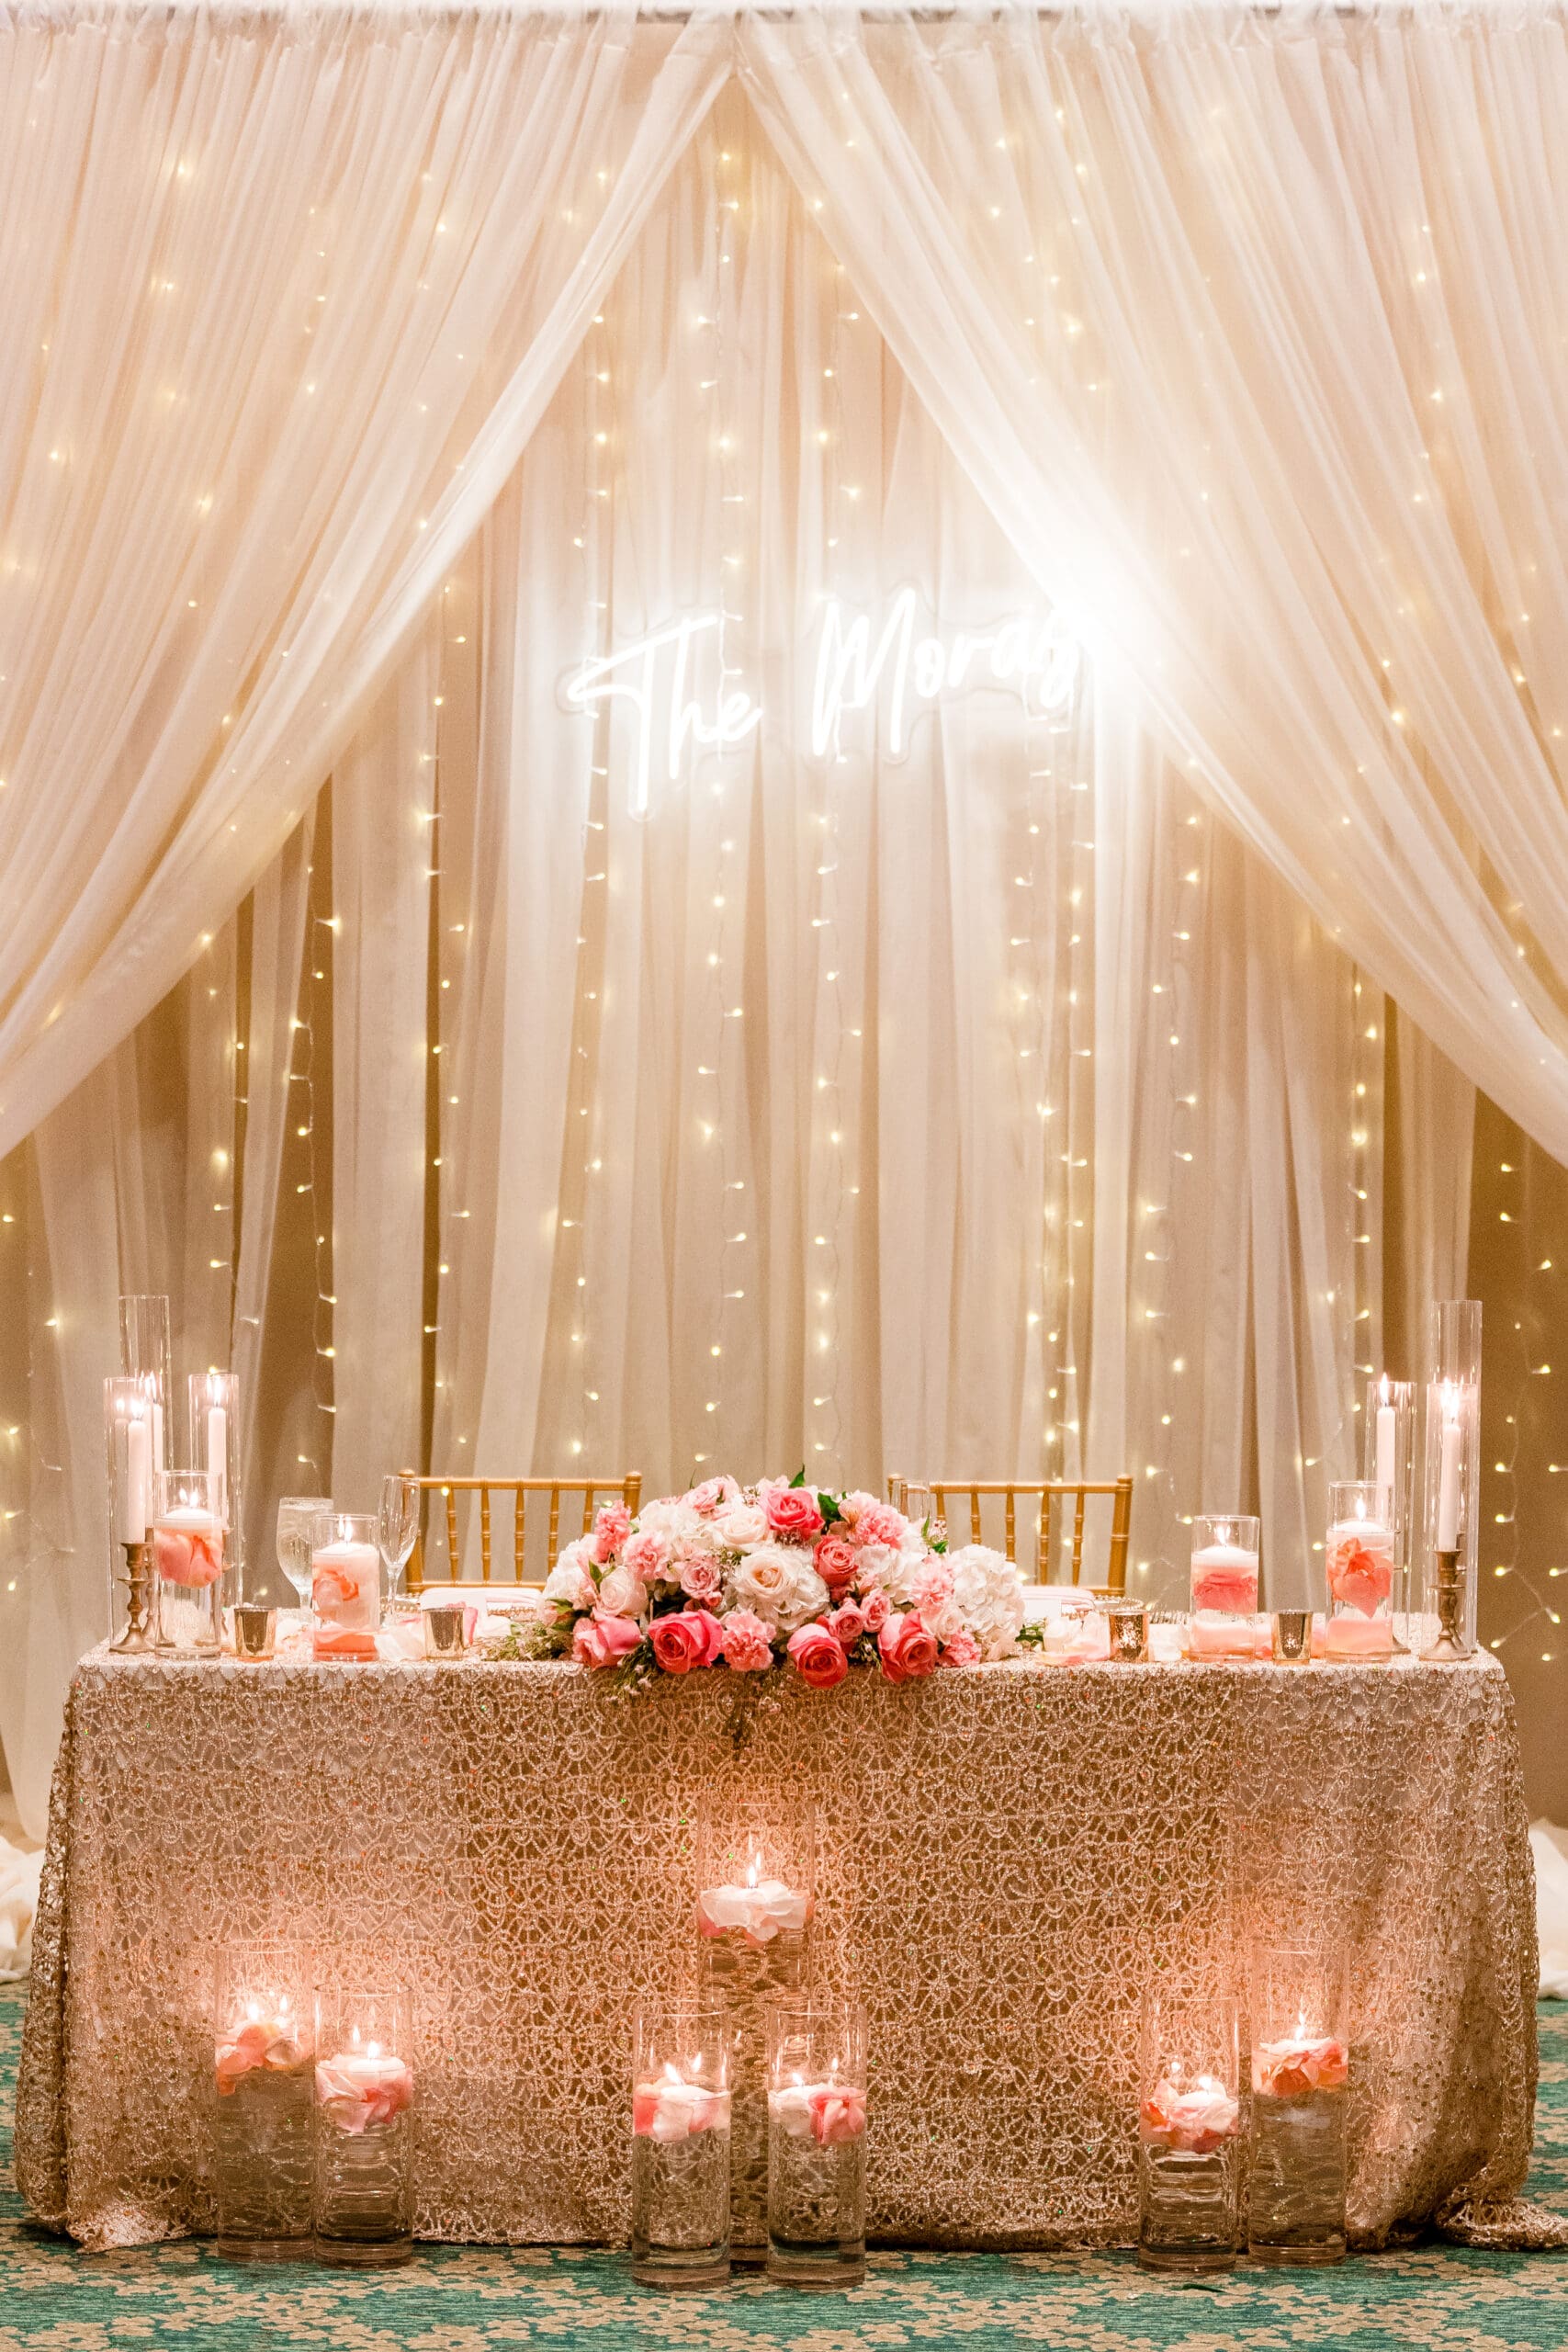 The couple's table adorned with flowers, lights, and white drapes in the background, featuring a gold-patterned tablecloth and elegant decor.